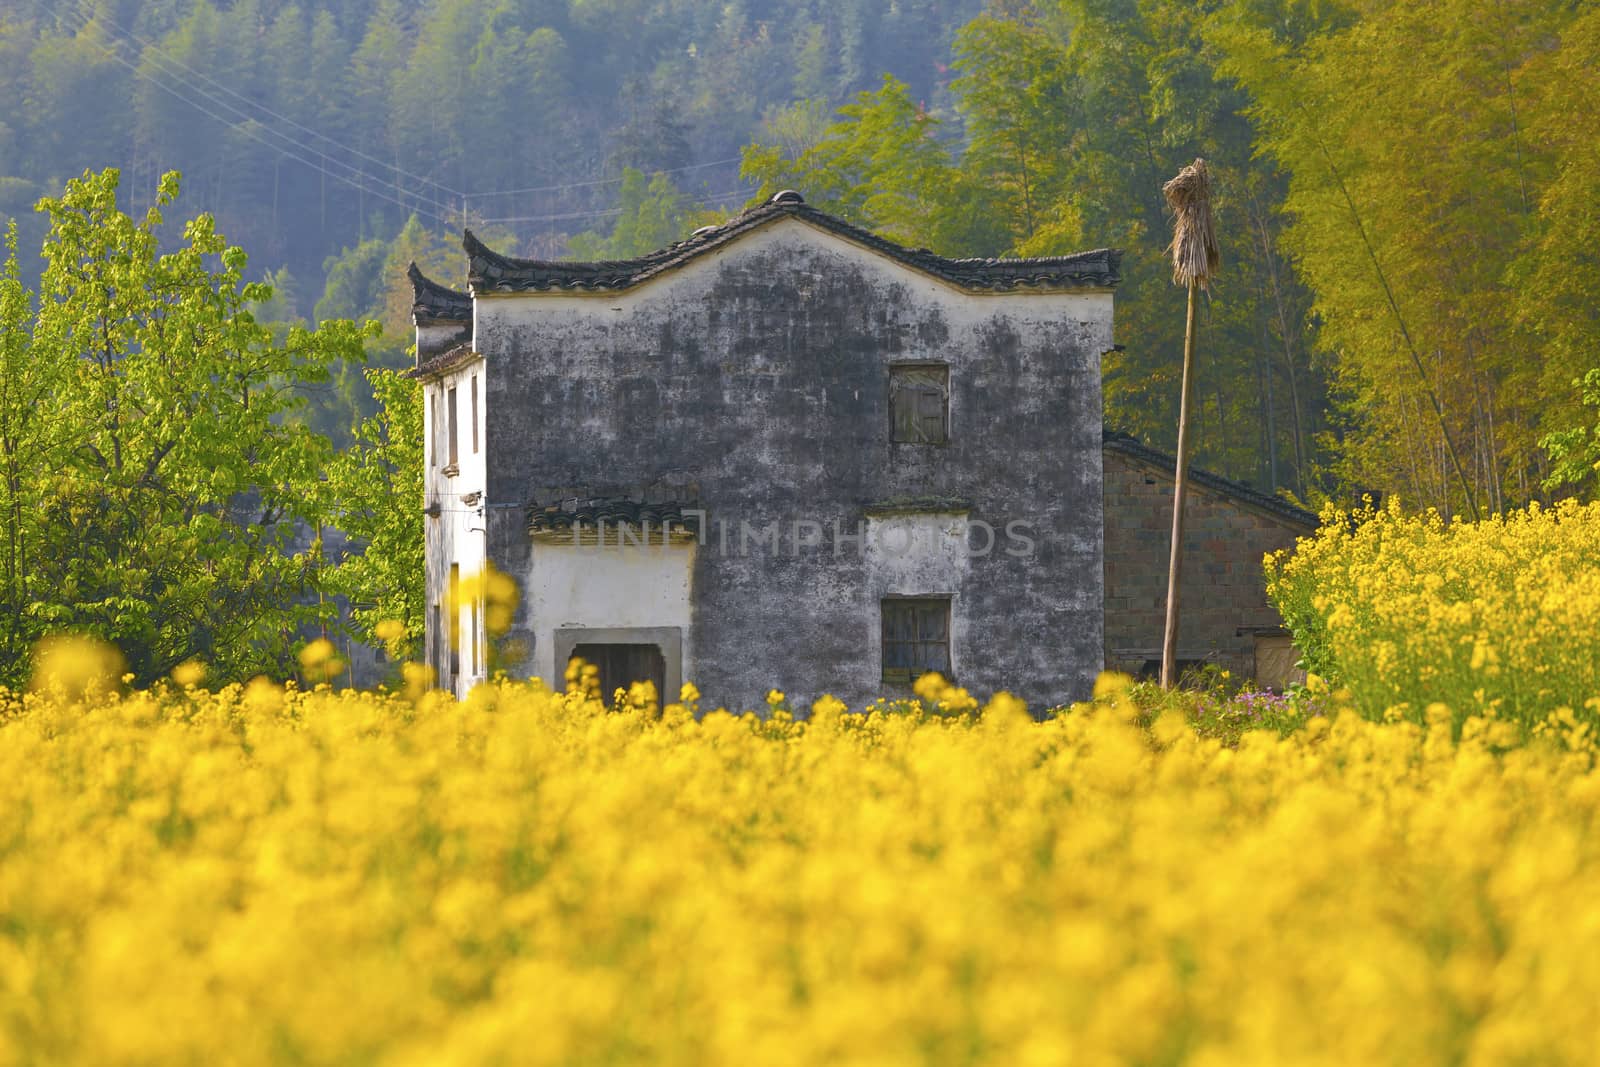 Rural landscape in Wuyuan by kawing921